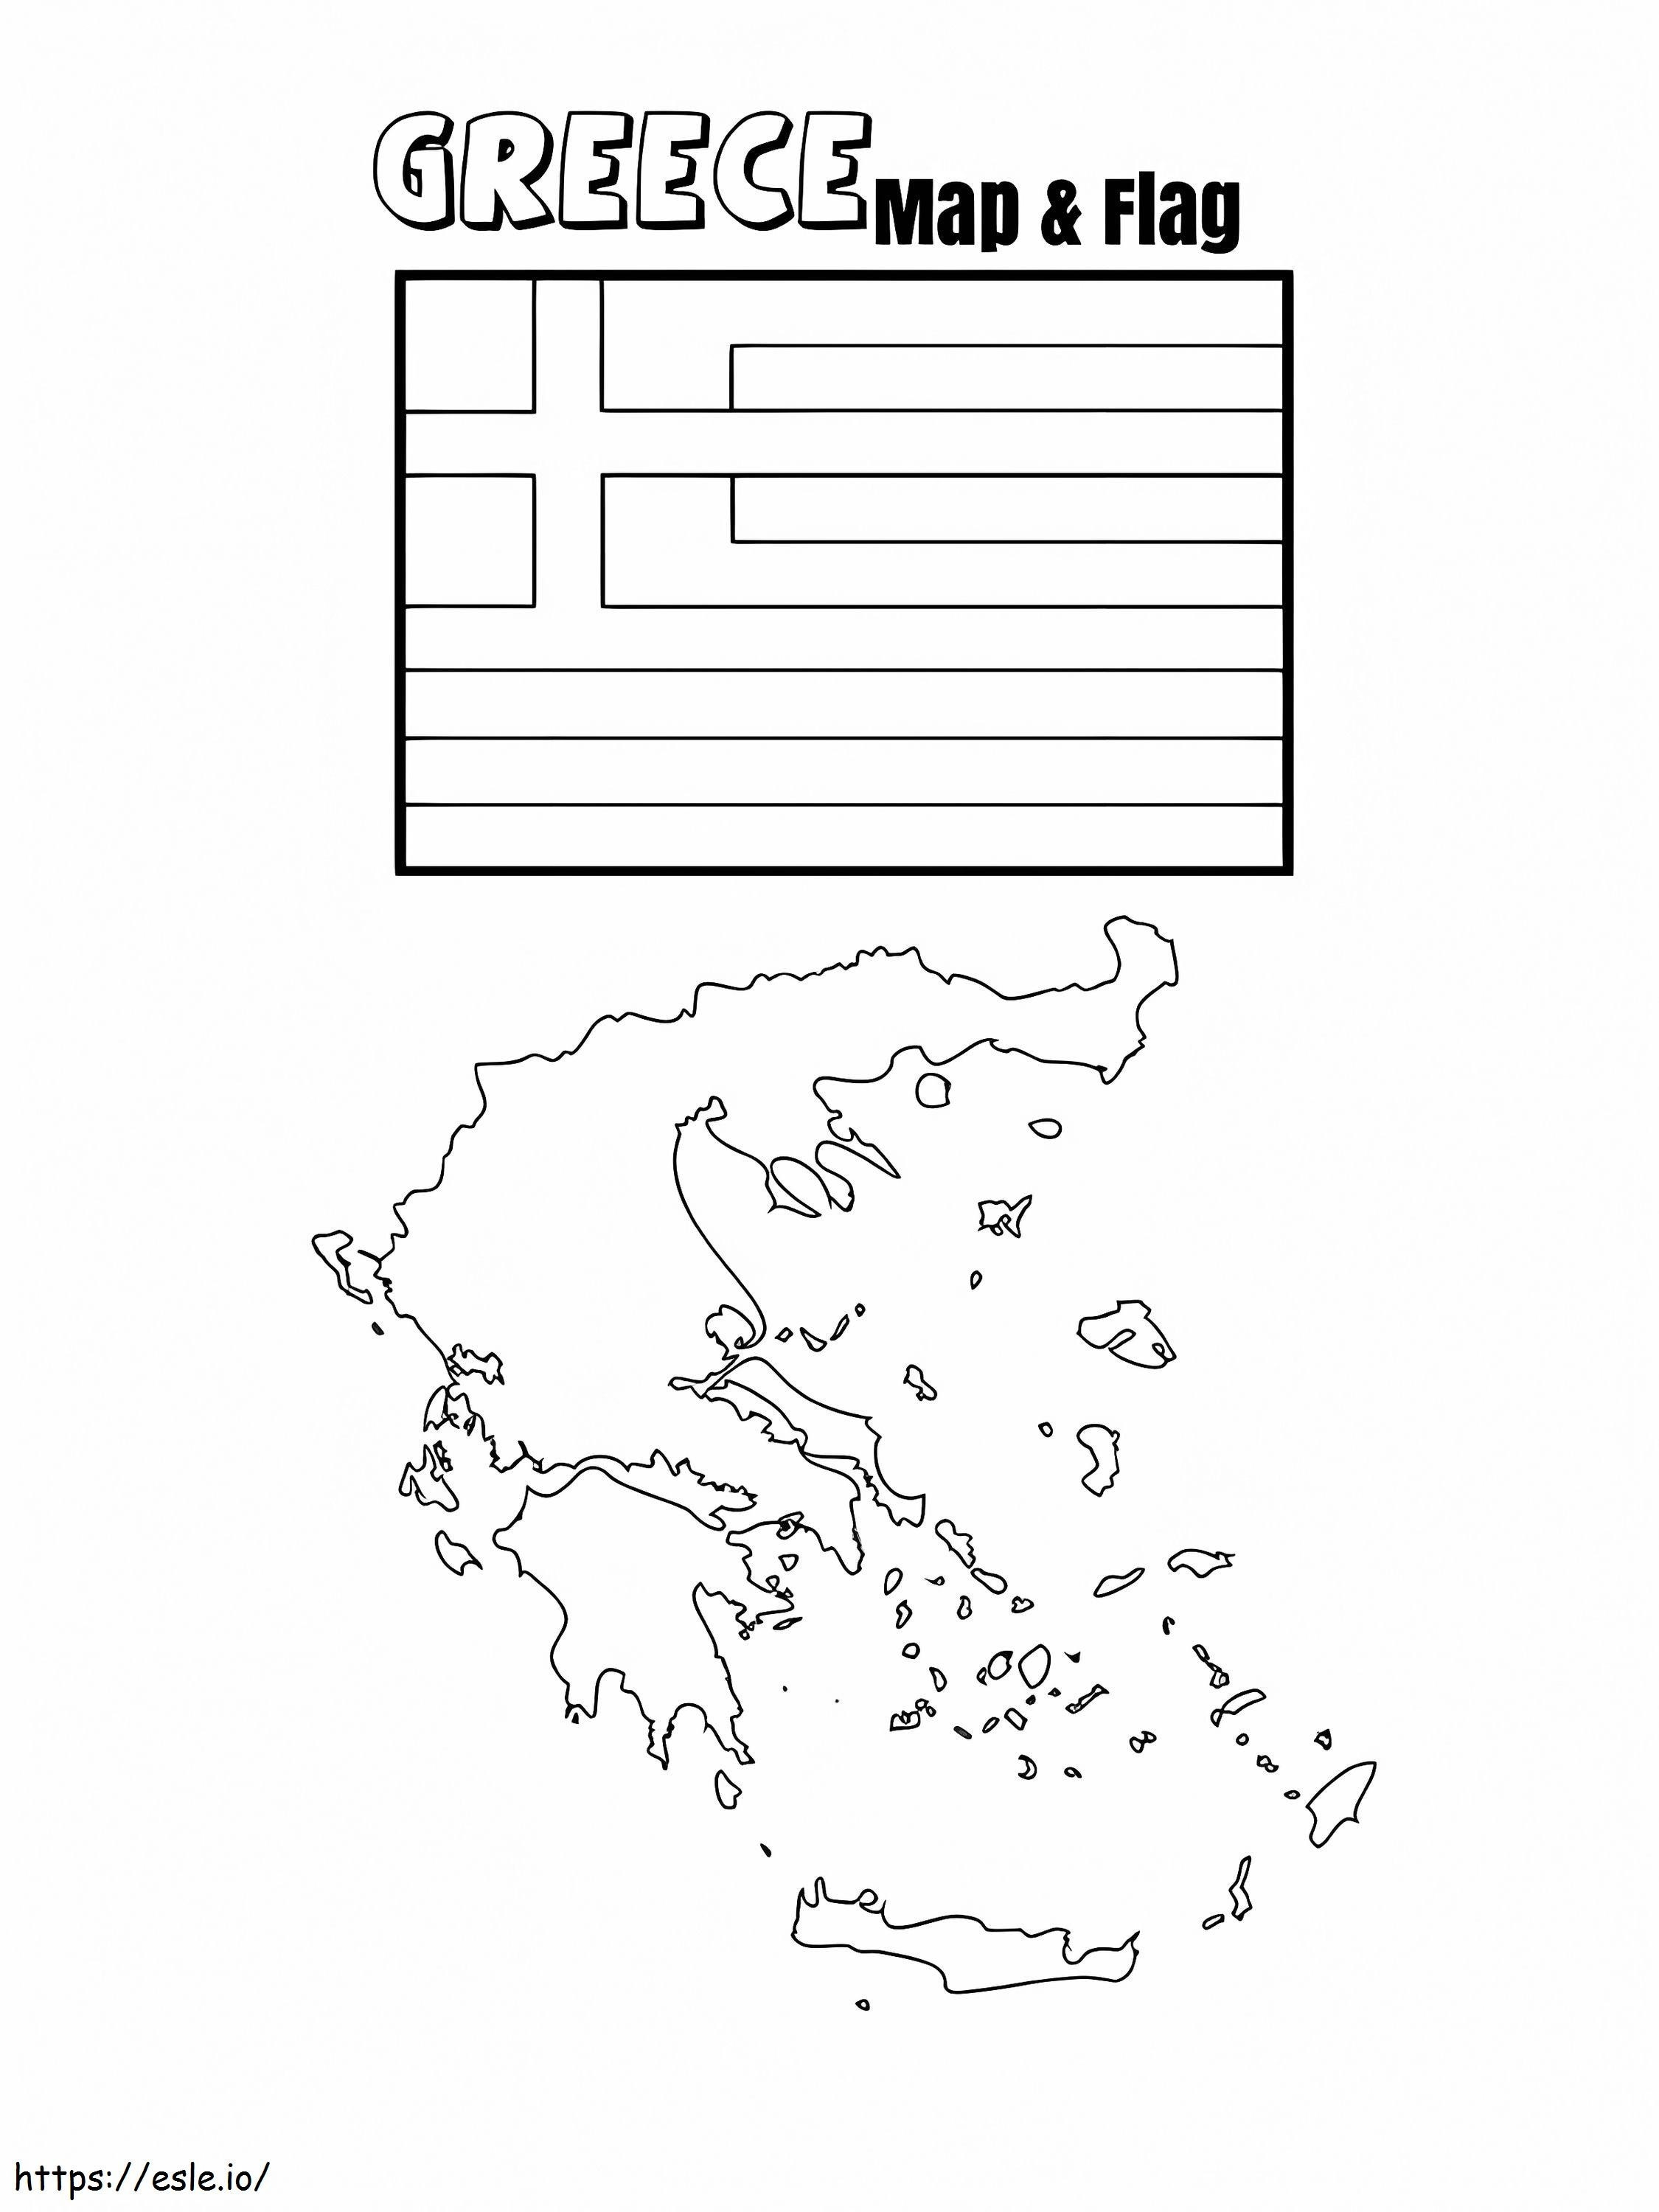 Greece Flag And Map coloring page